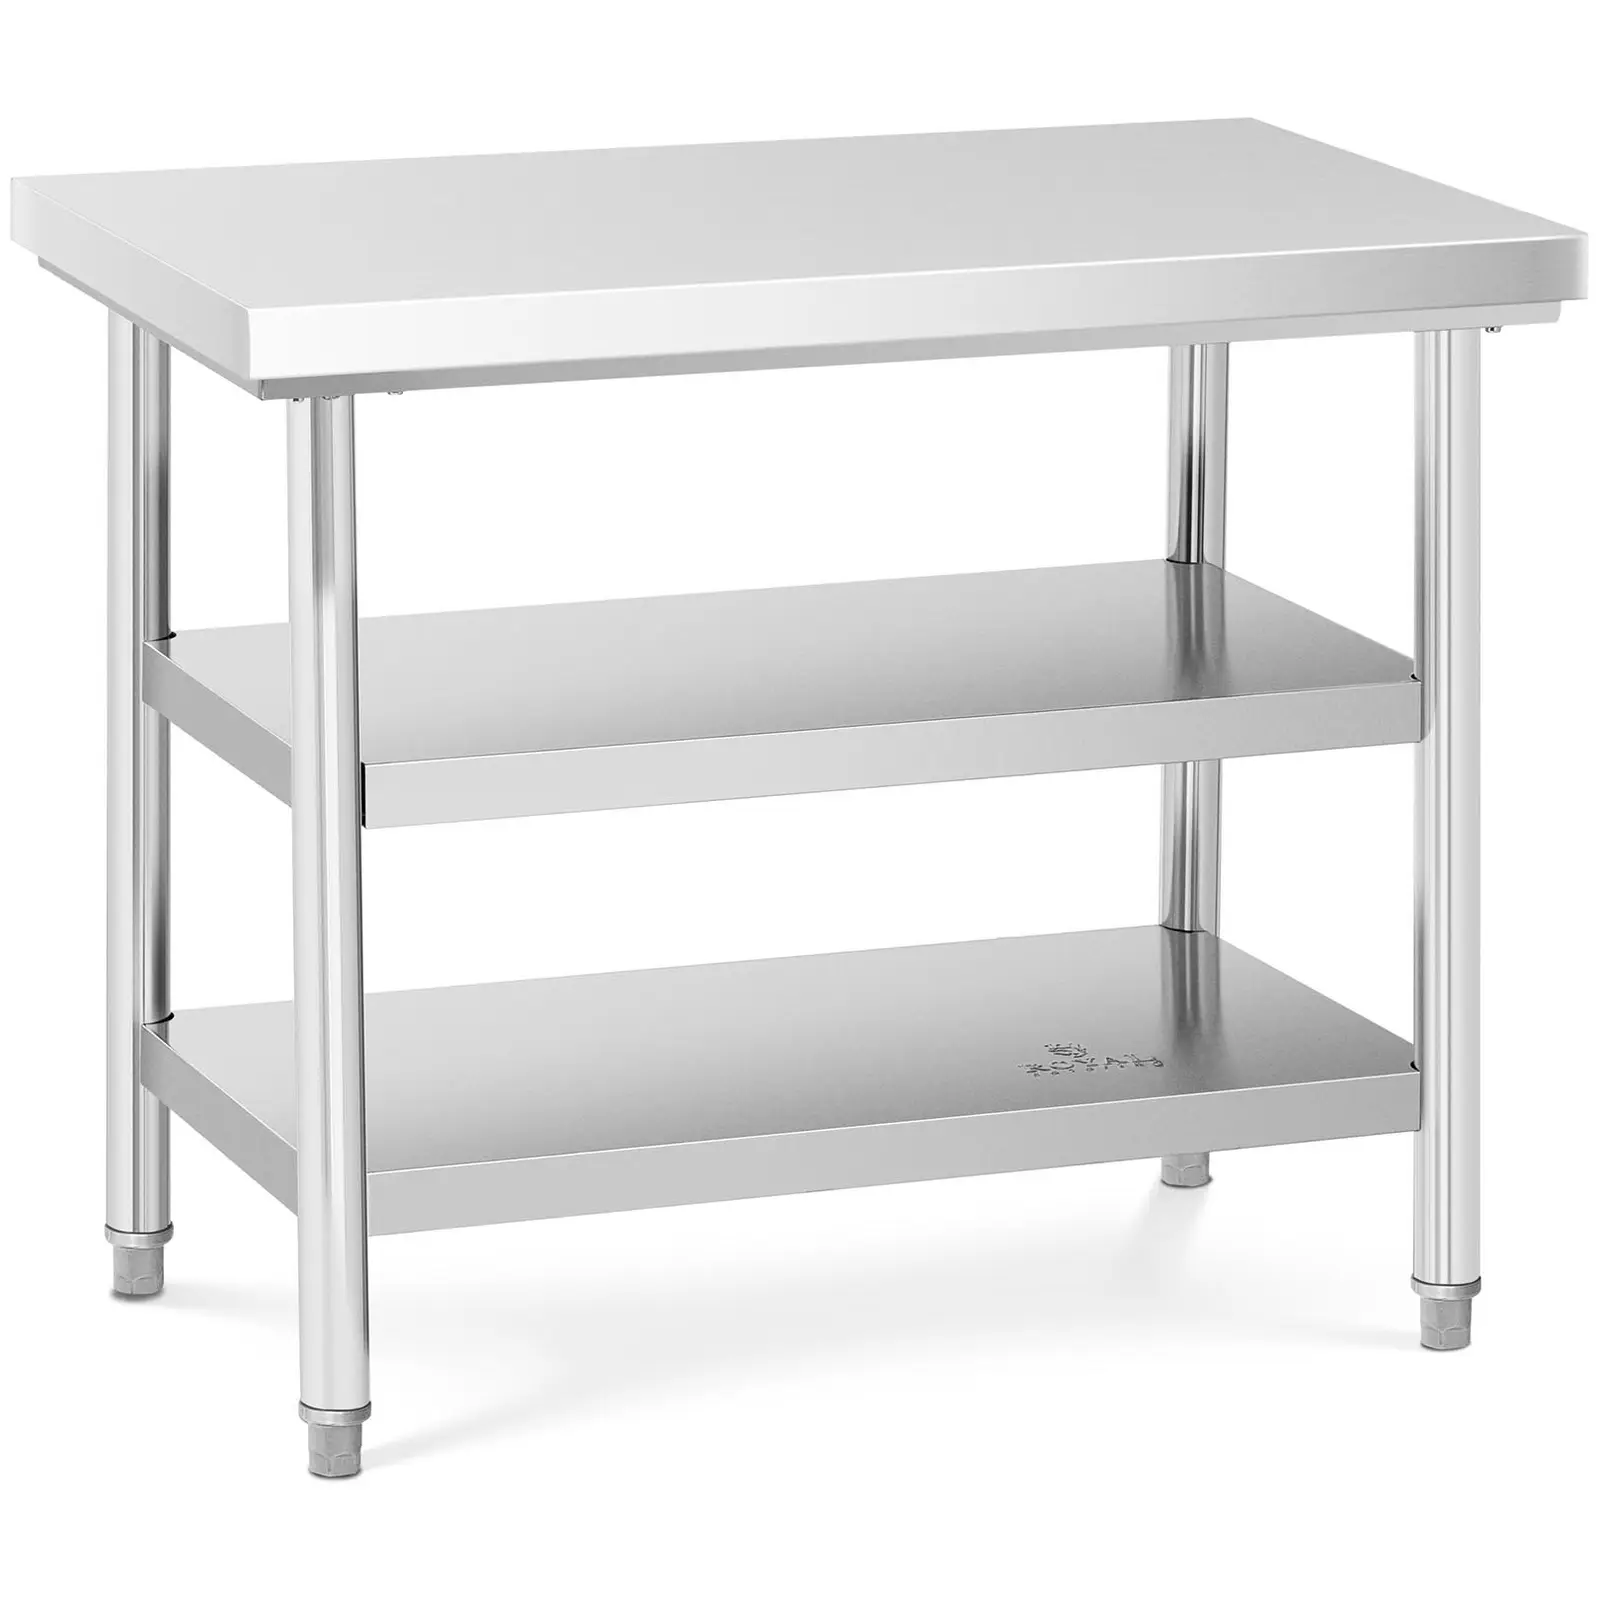 Stainless Steel Work Table- 100 x 60 cm - 600 kg - 3 levels